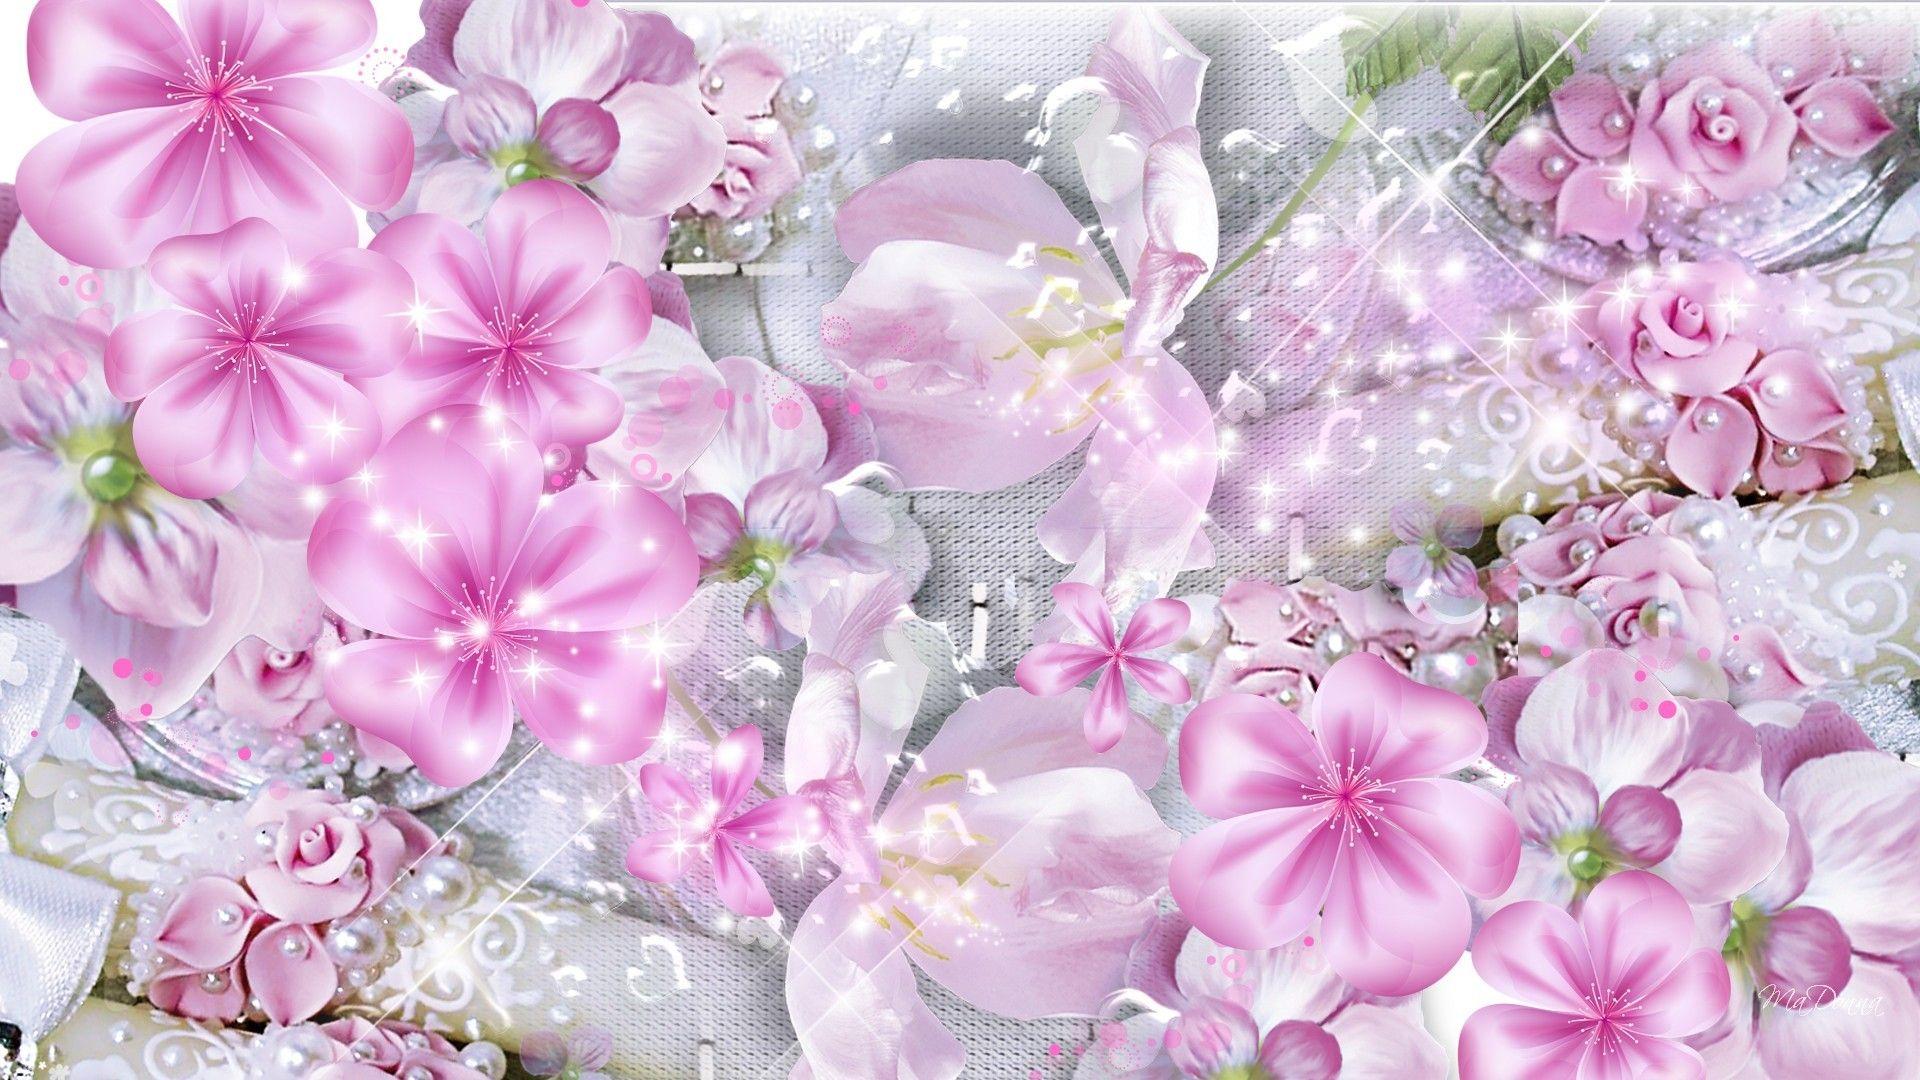 Pearls Tag wallpaper: Mothers Day Rose Pink Pearls MothersDay